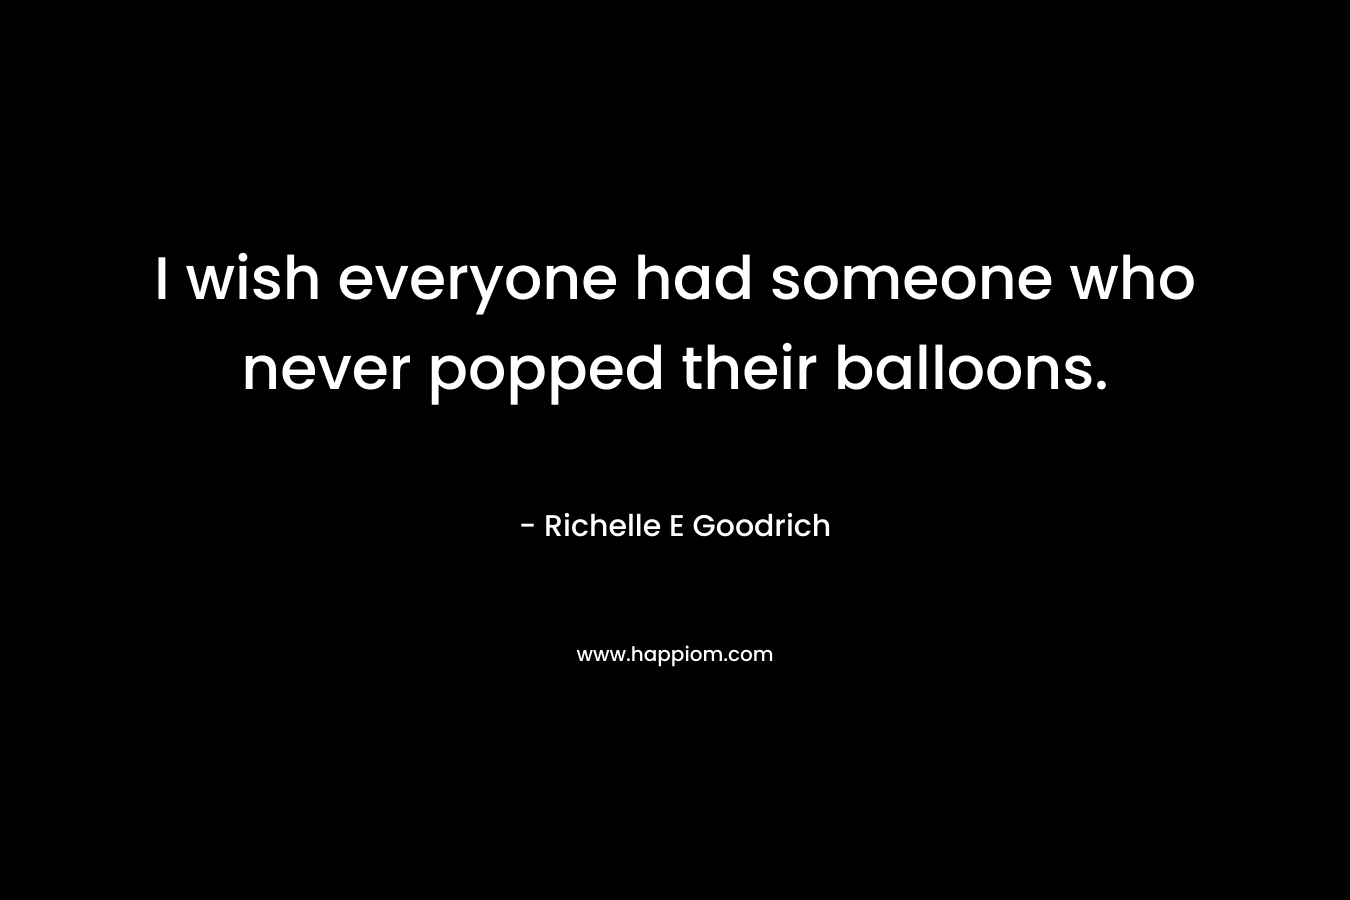 I wish everyone had someone who never popped their balloons. – Richelle E Goodrich